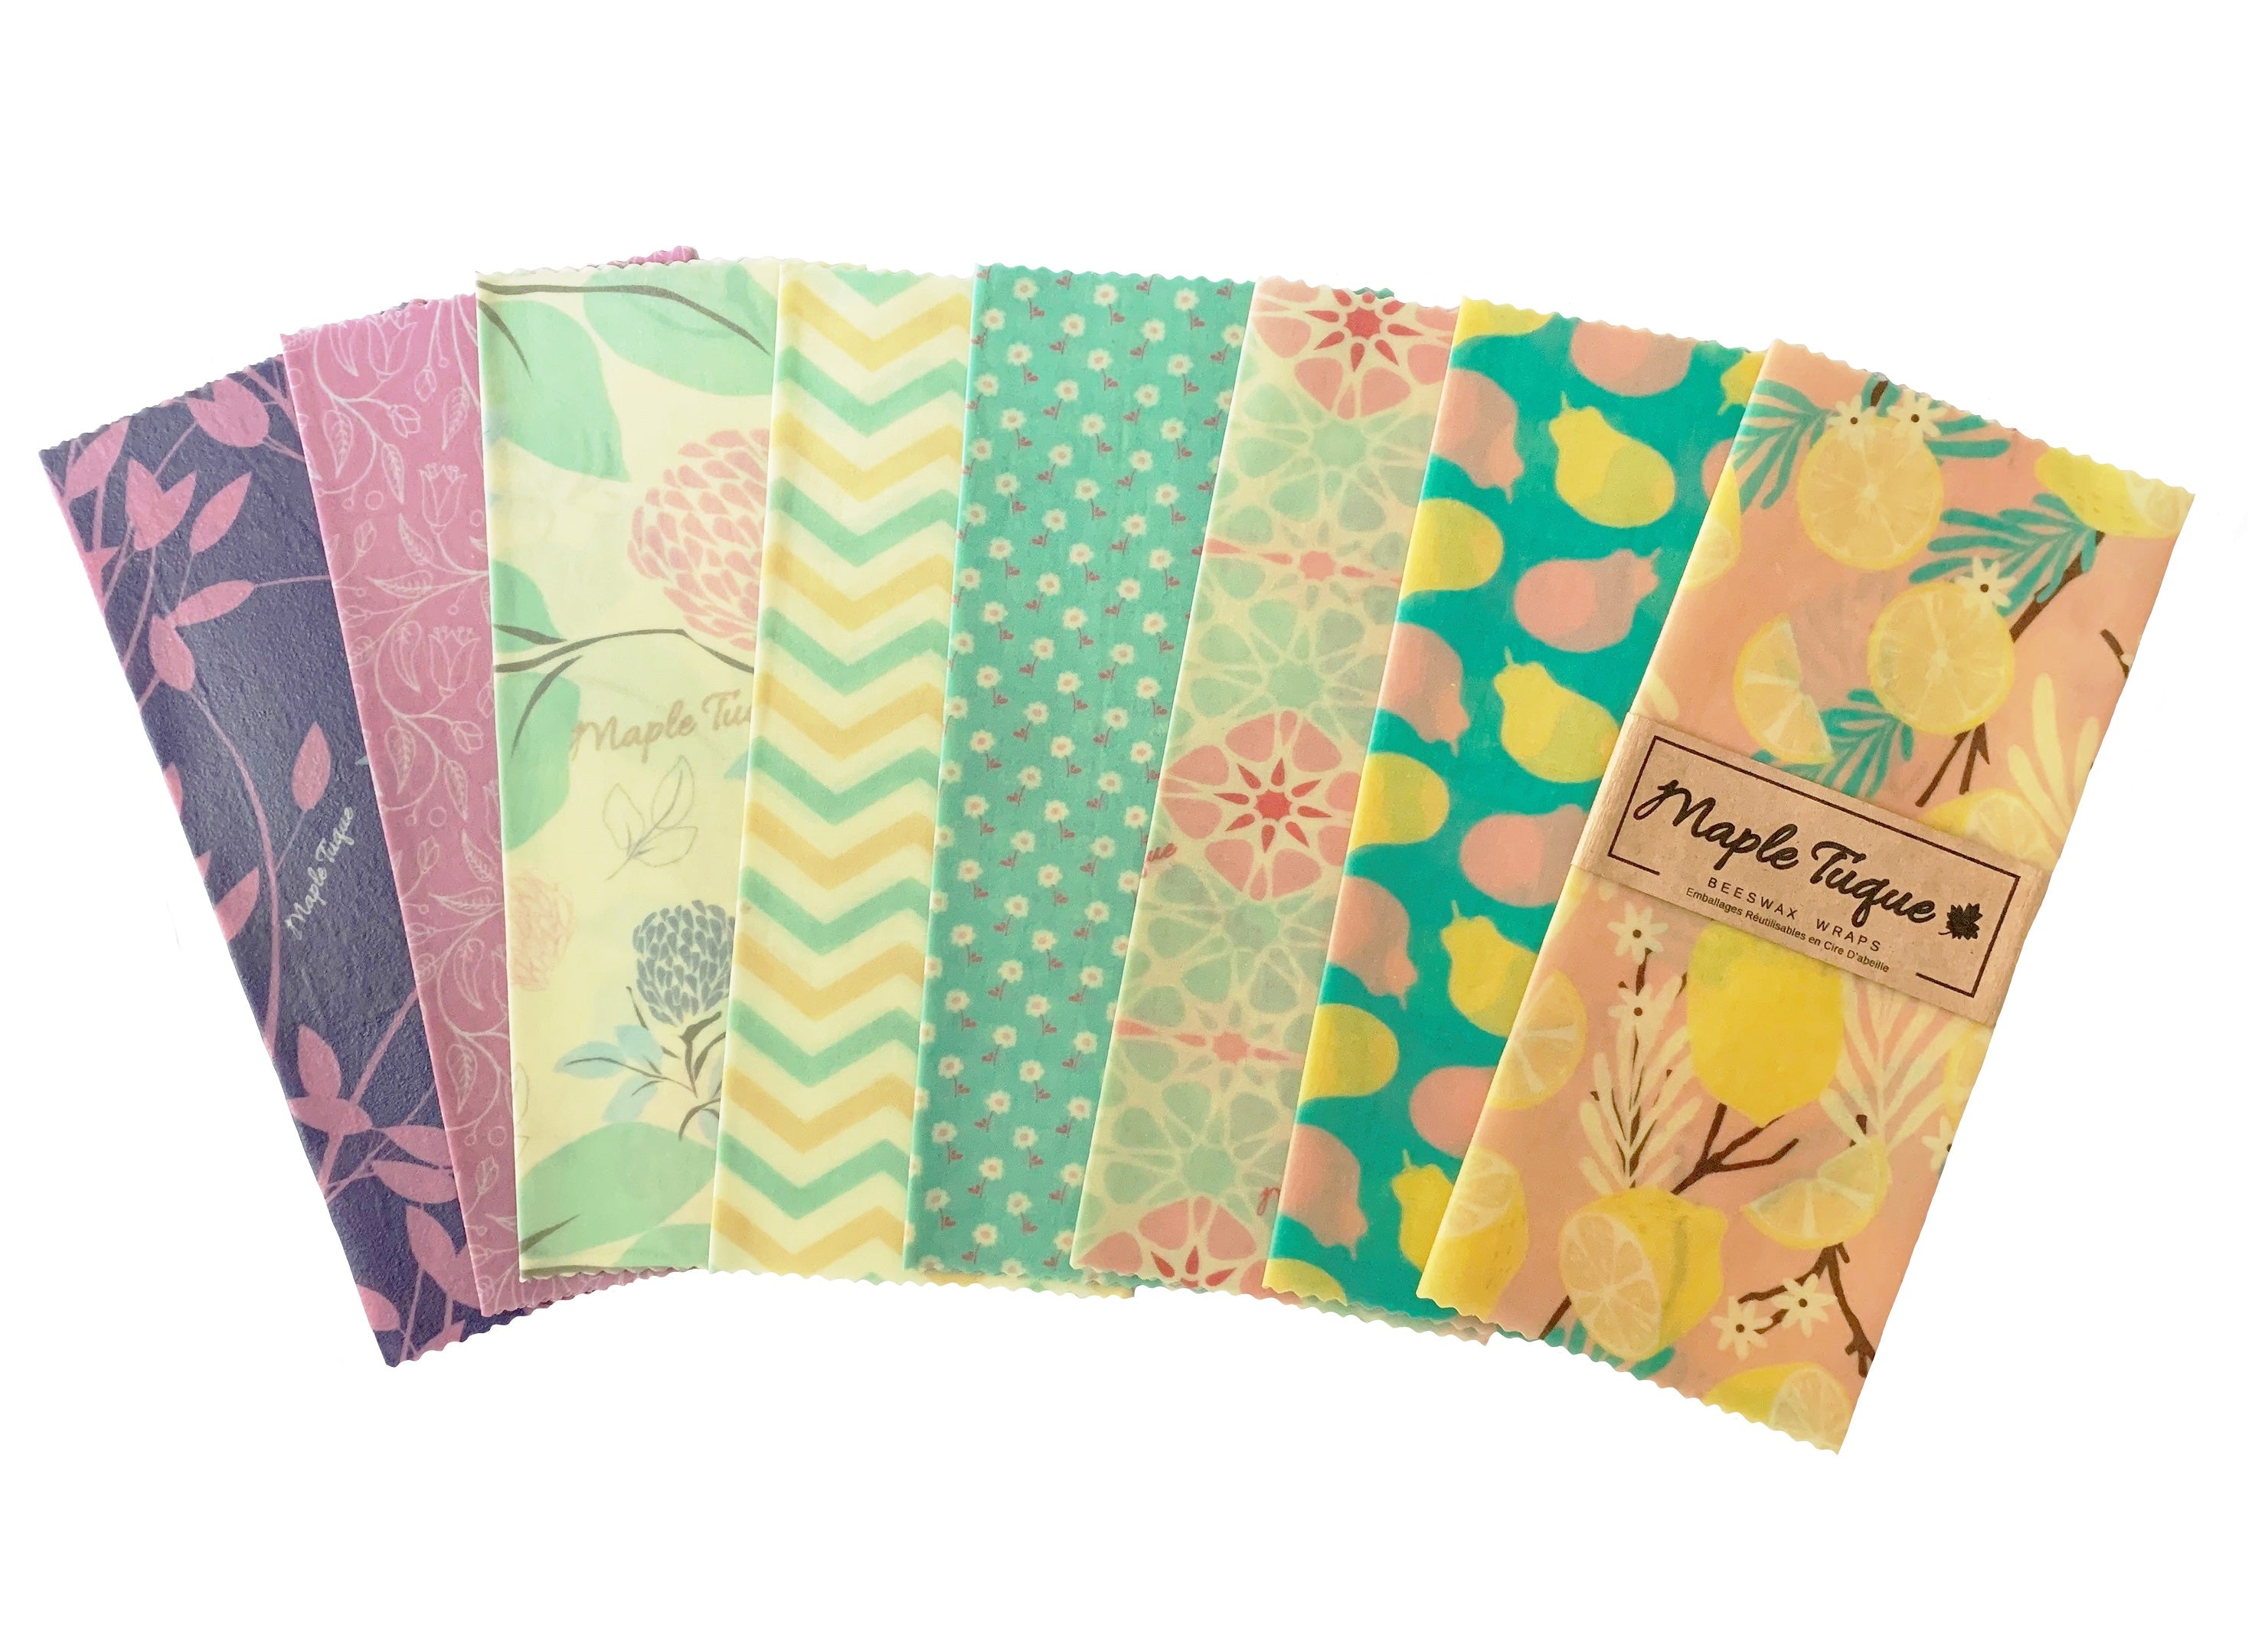 Pack of 2 Assorted Beeswax Wraps - Medium & Small